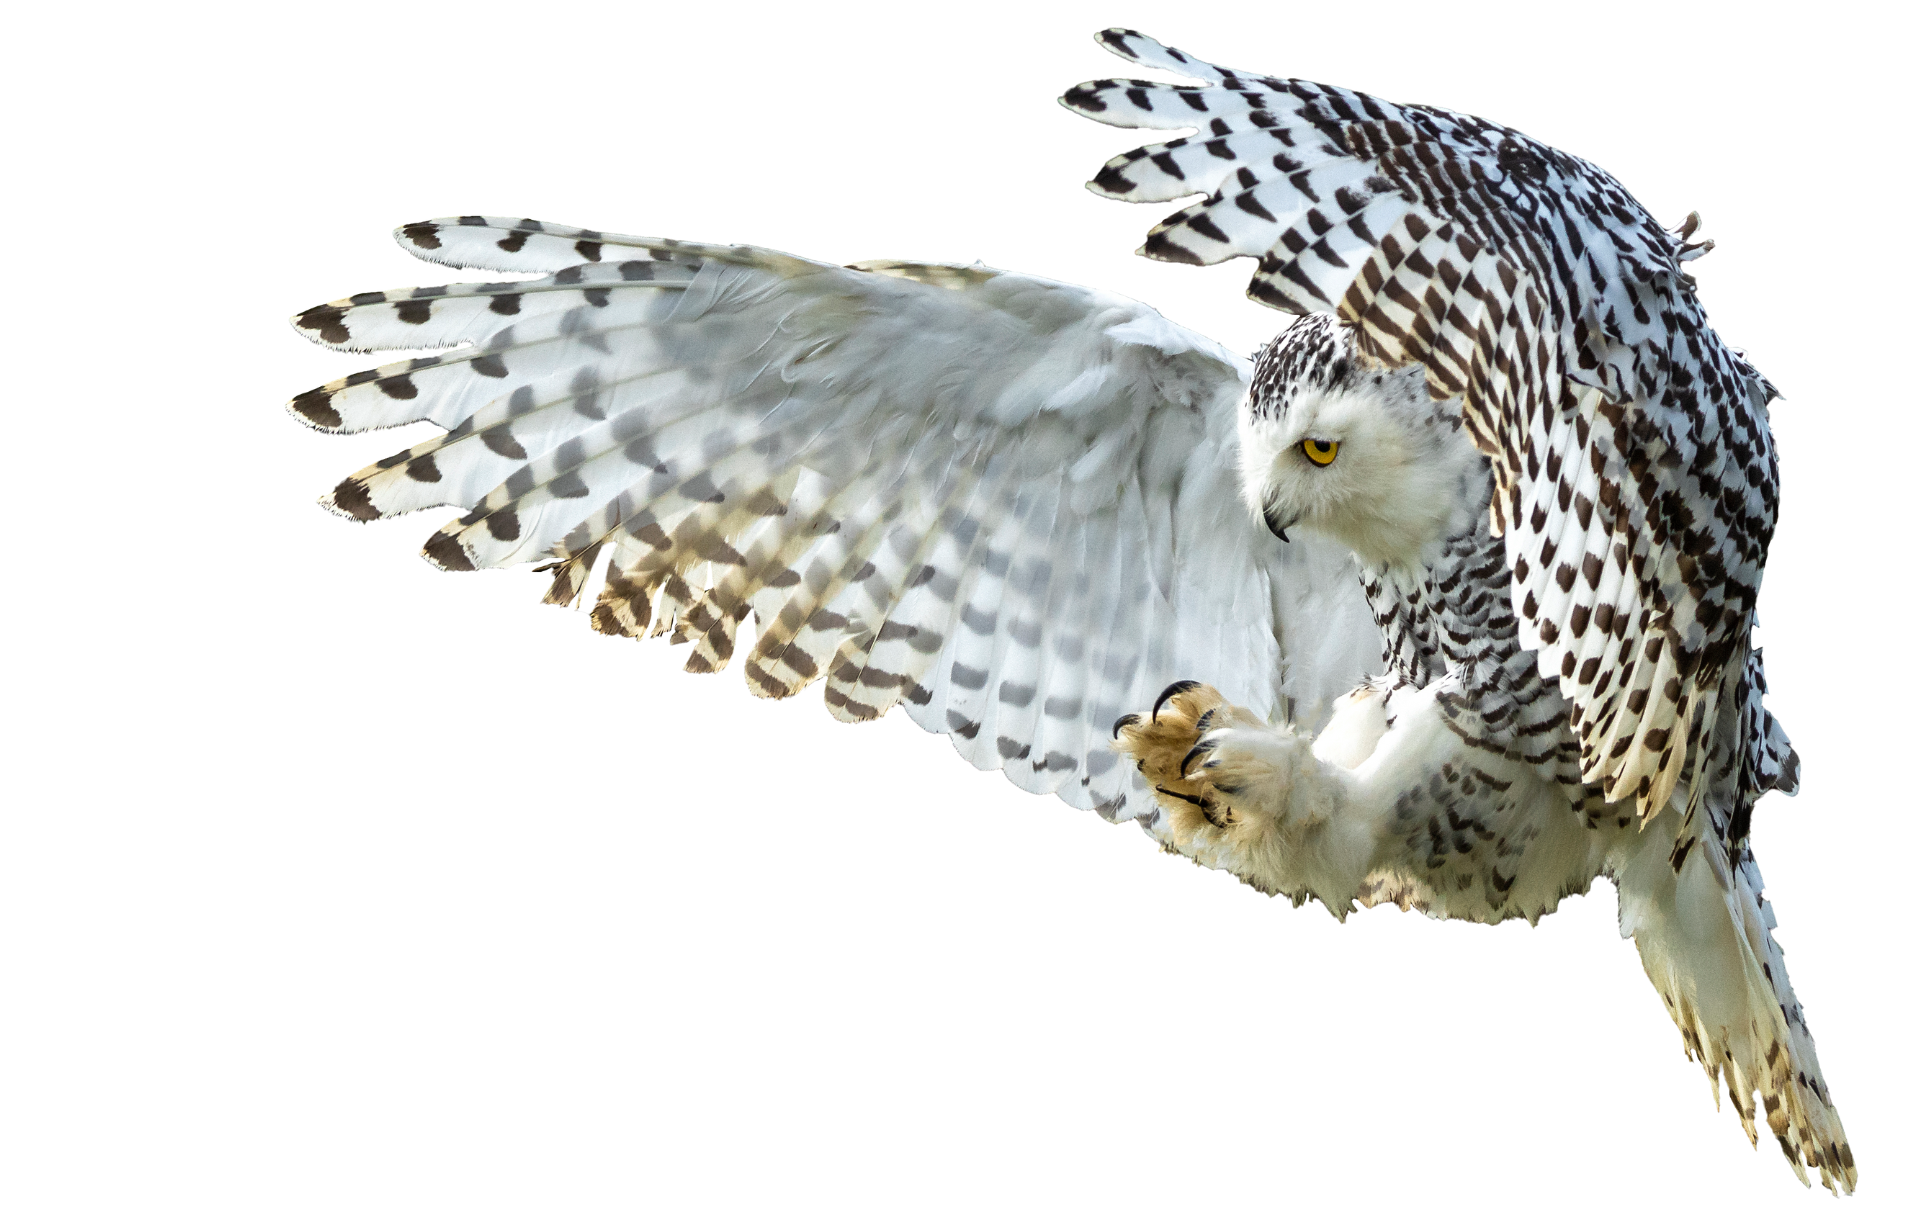 a snowy owl is flying through the air with its wings spread .